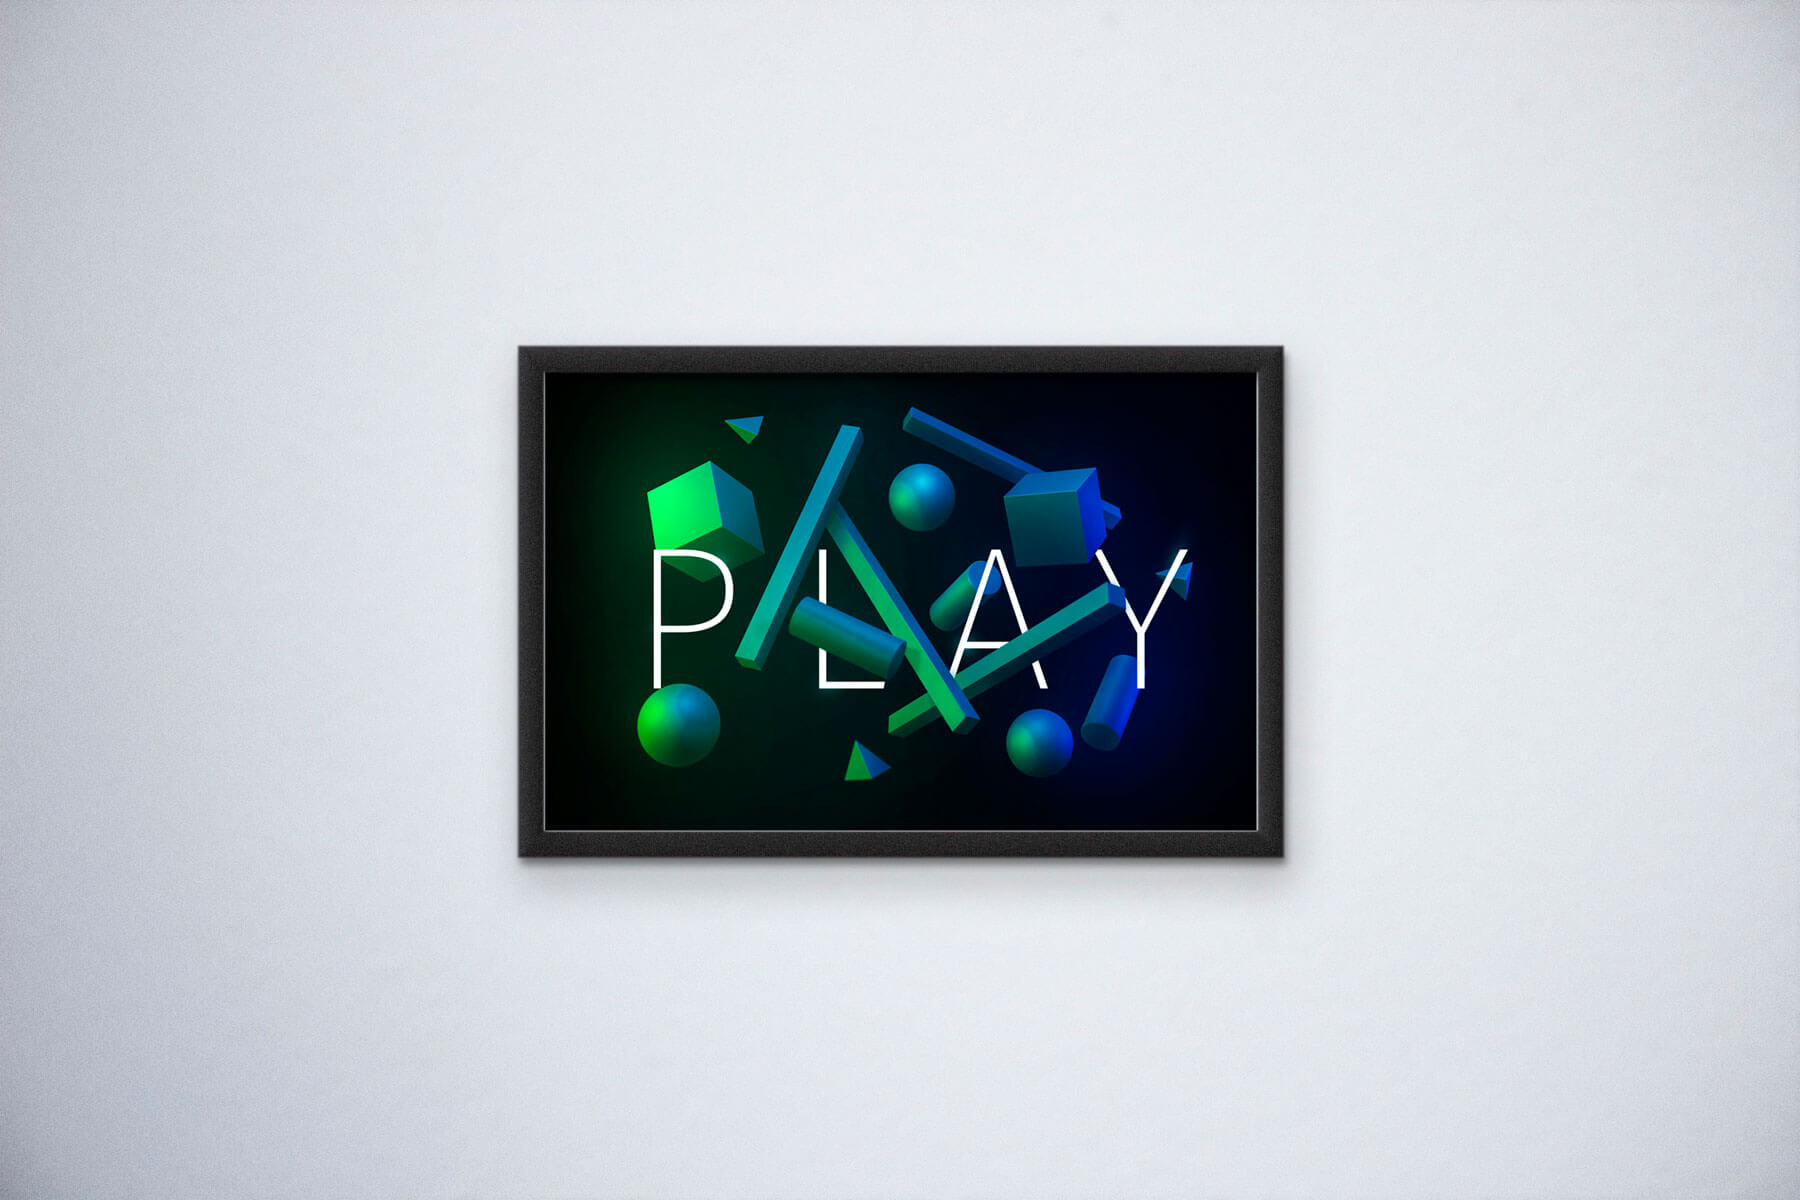 Play with shapes - typography artwork design by stilknecht - mock up poster green